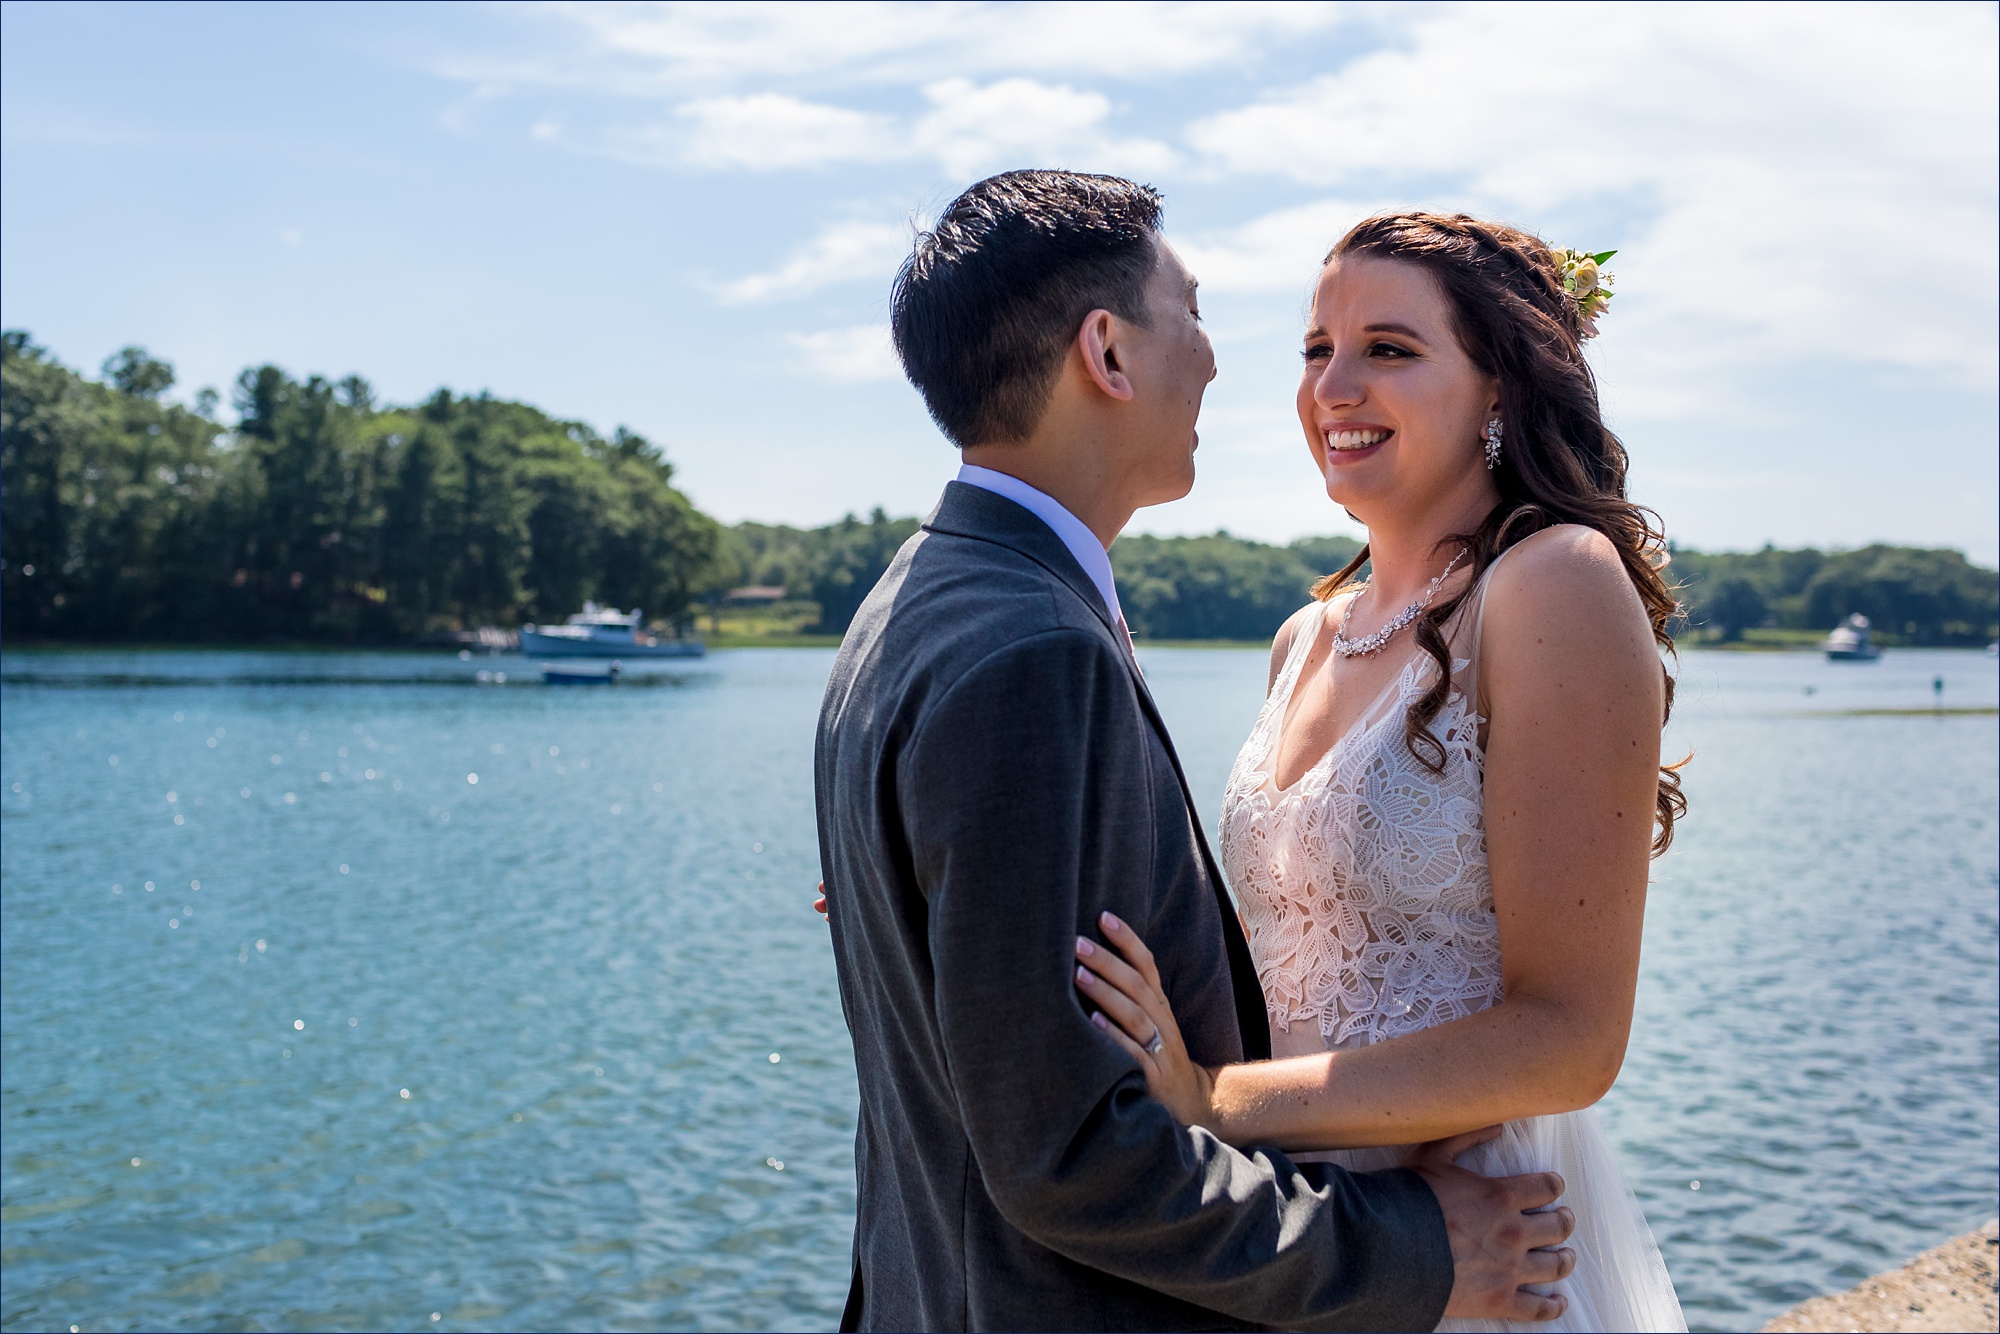 The bride and groom laugh while out on the Wiggly Bridge in York Maine for their wedding day